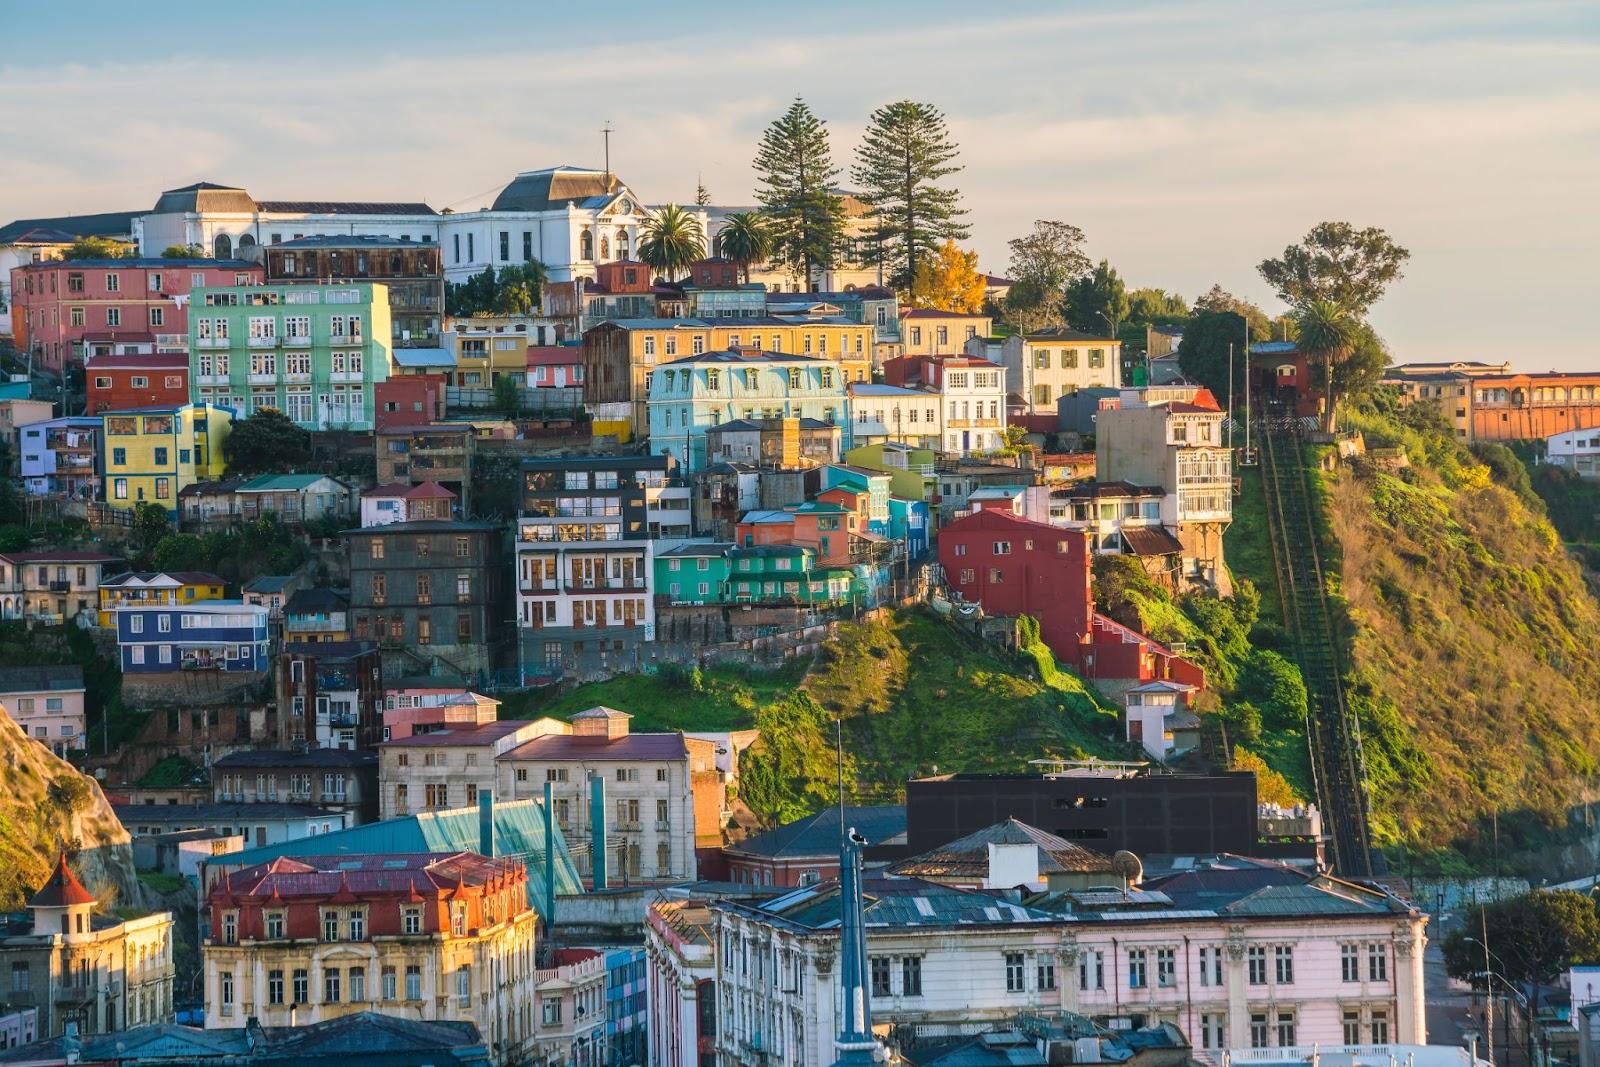 Colourful buildings of the UNESCO World Heritage city of Valparaiso, Chile